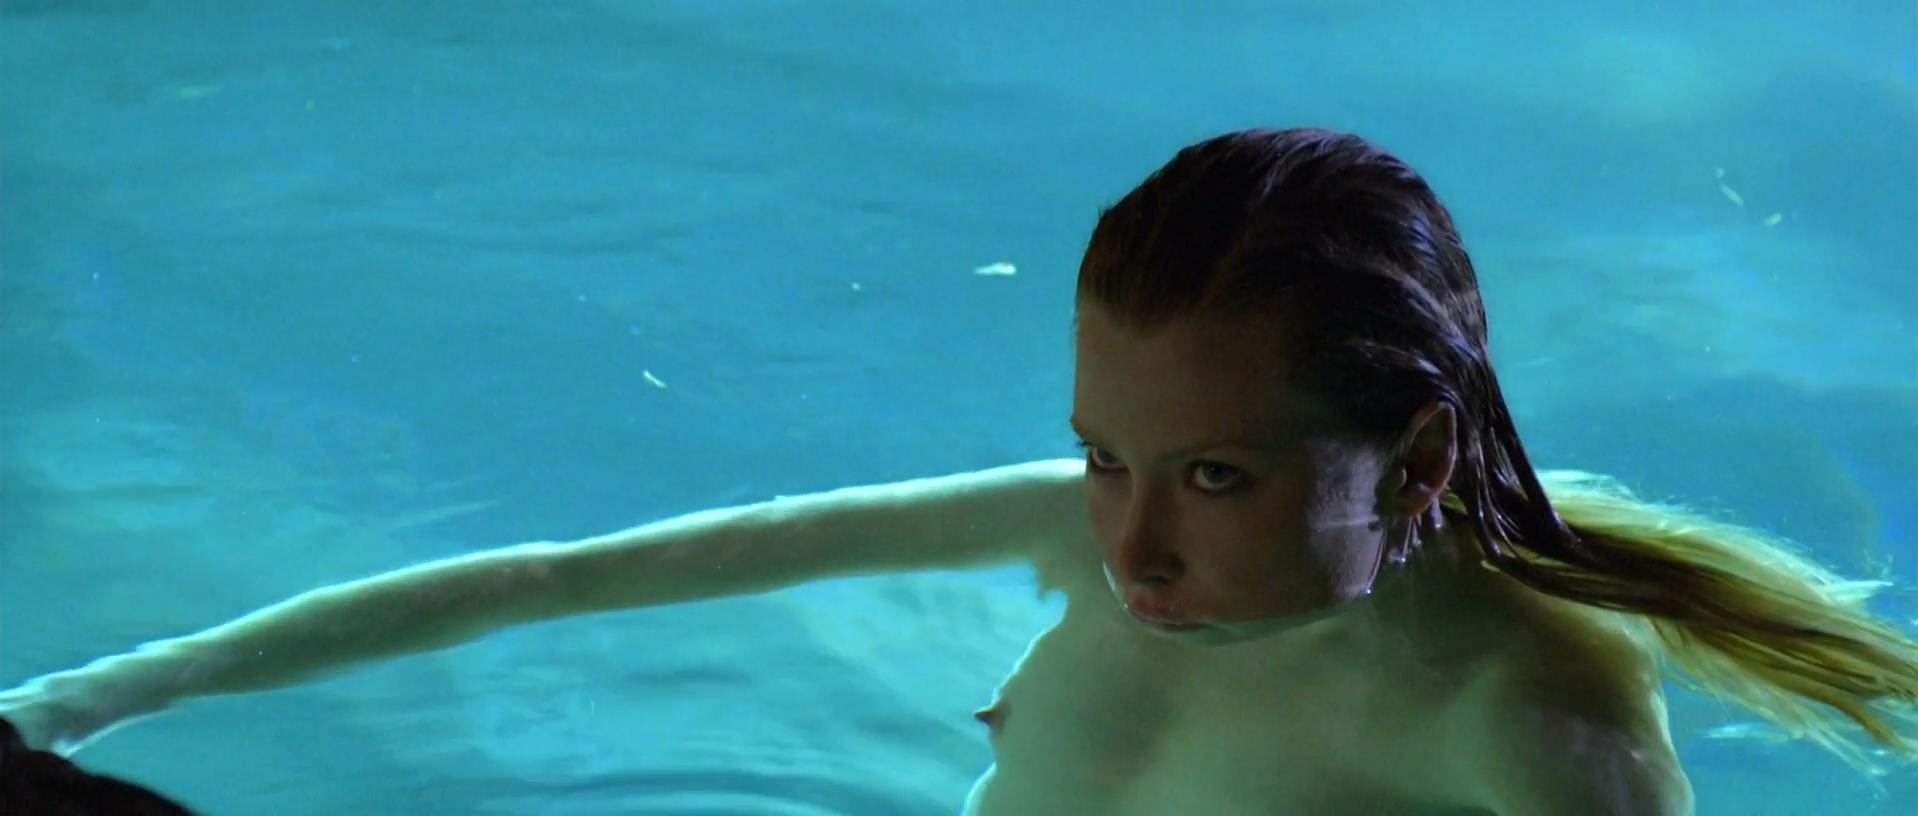 Emma Booth nude - Swerve (2011)